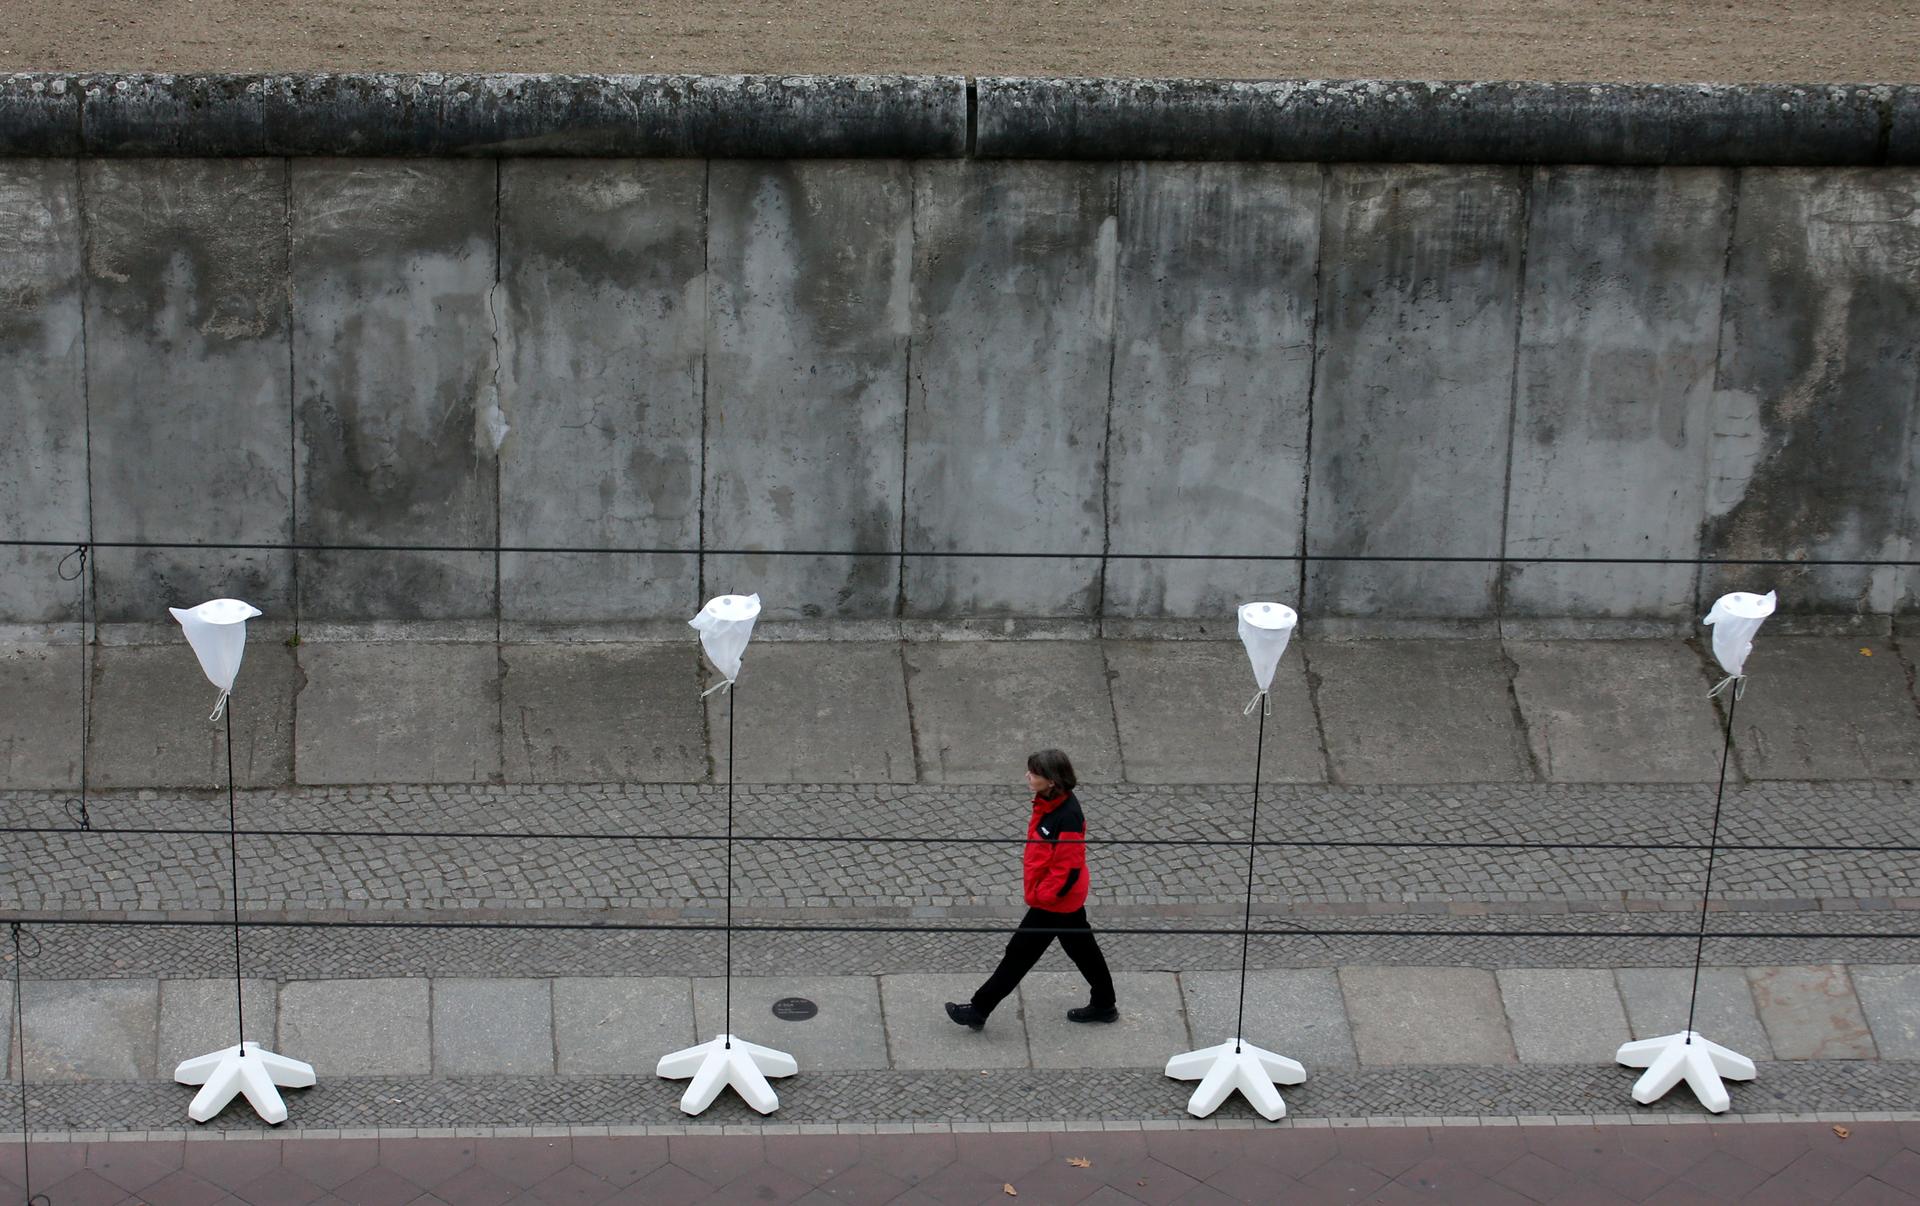 A part of the inner city of Berlin will be temporarily divided from November 7 to 9, 2014, with a light installation featuring 8,000 luminous white balloons to commemorate the 25th anniversary of the fall of the Berlin Wall. Here a woman walks in front of